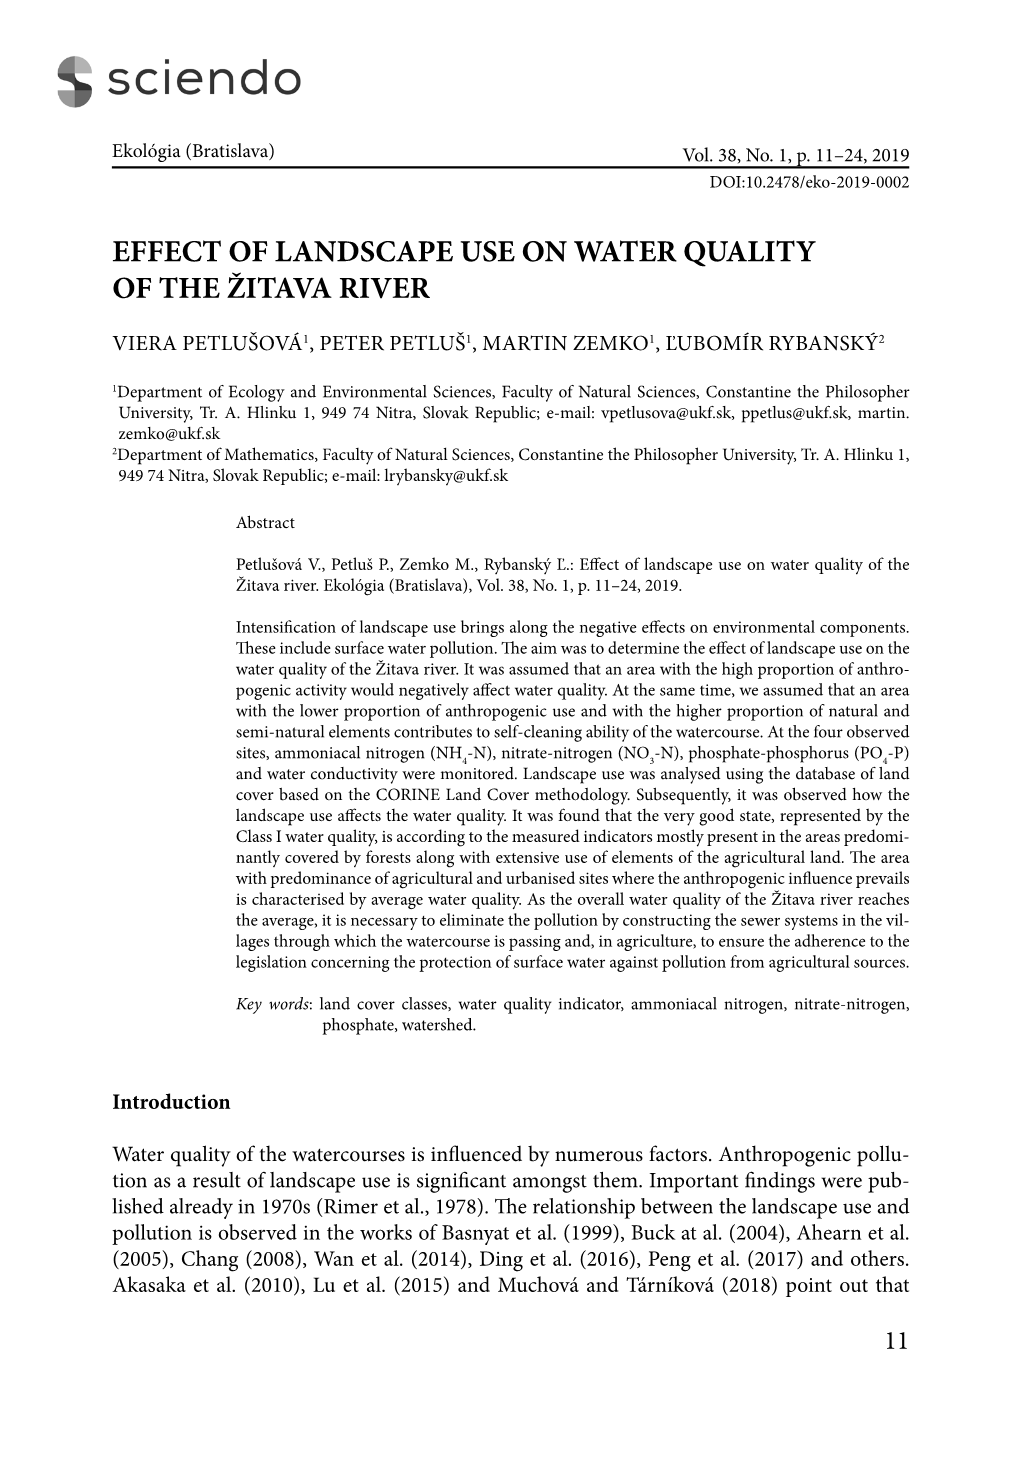 Effect of Landscape Use on Water Quality of the Žitava River